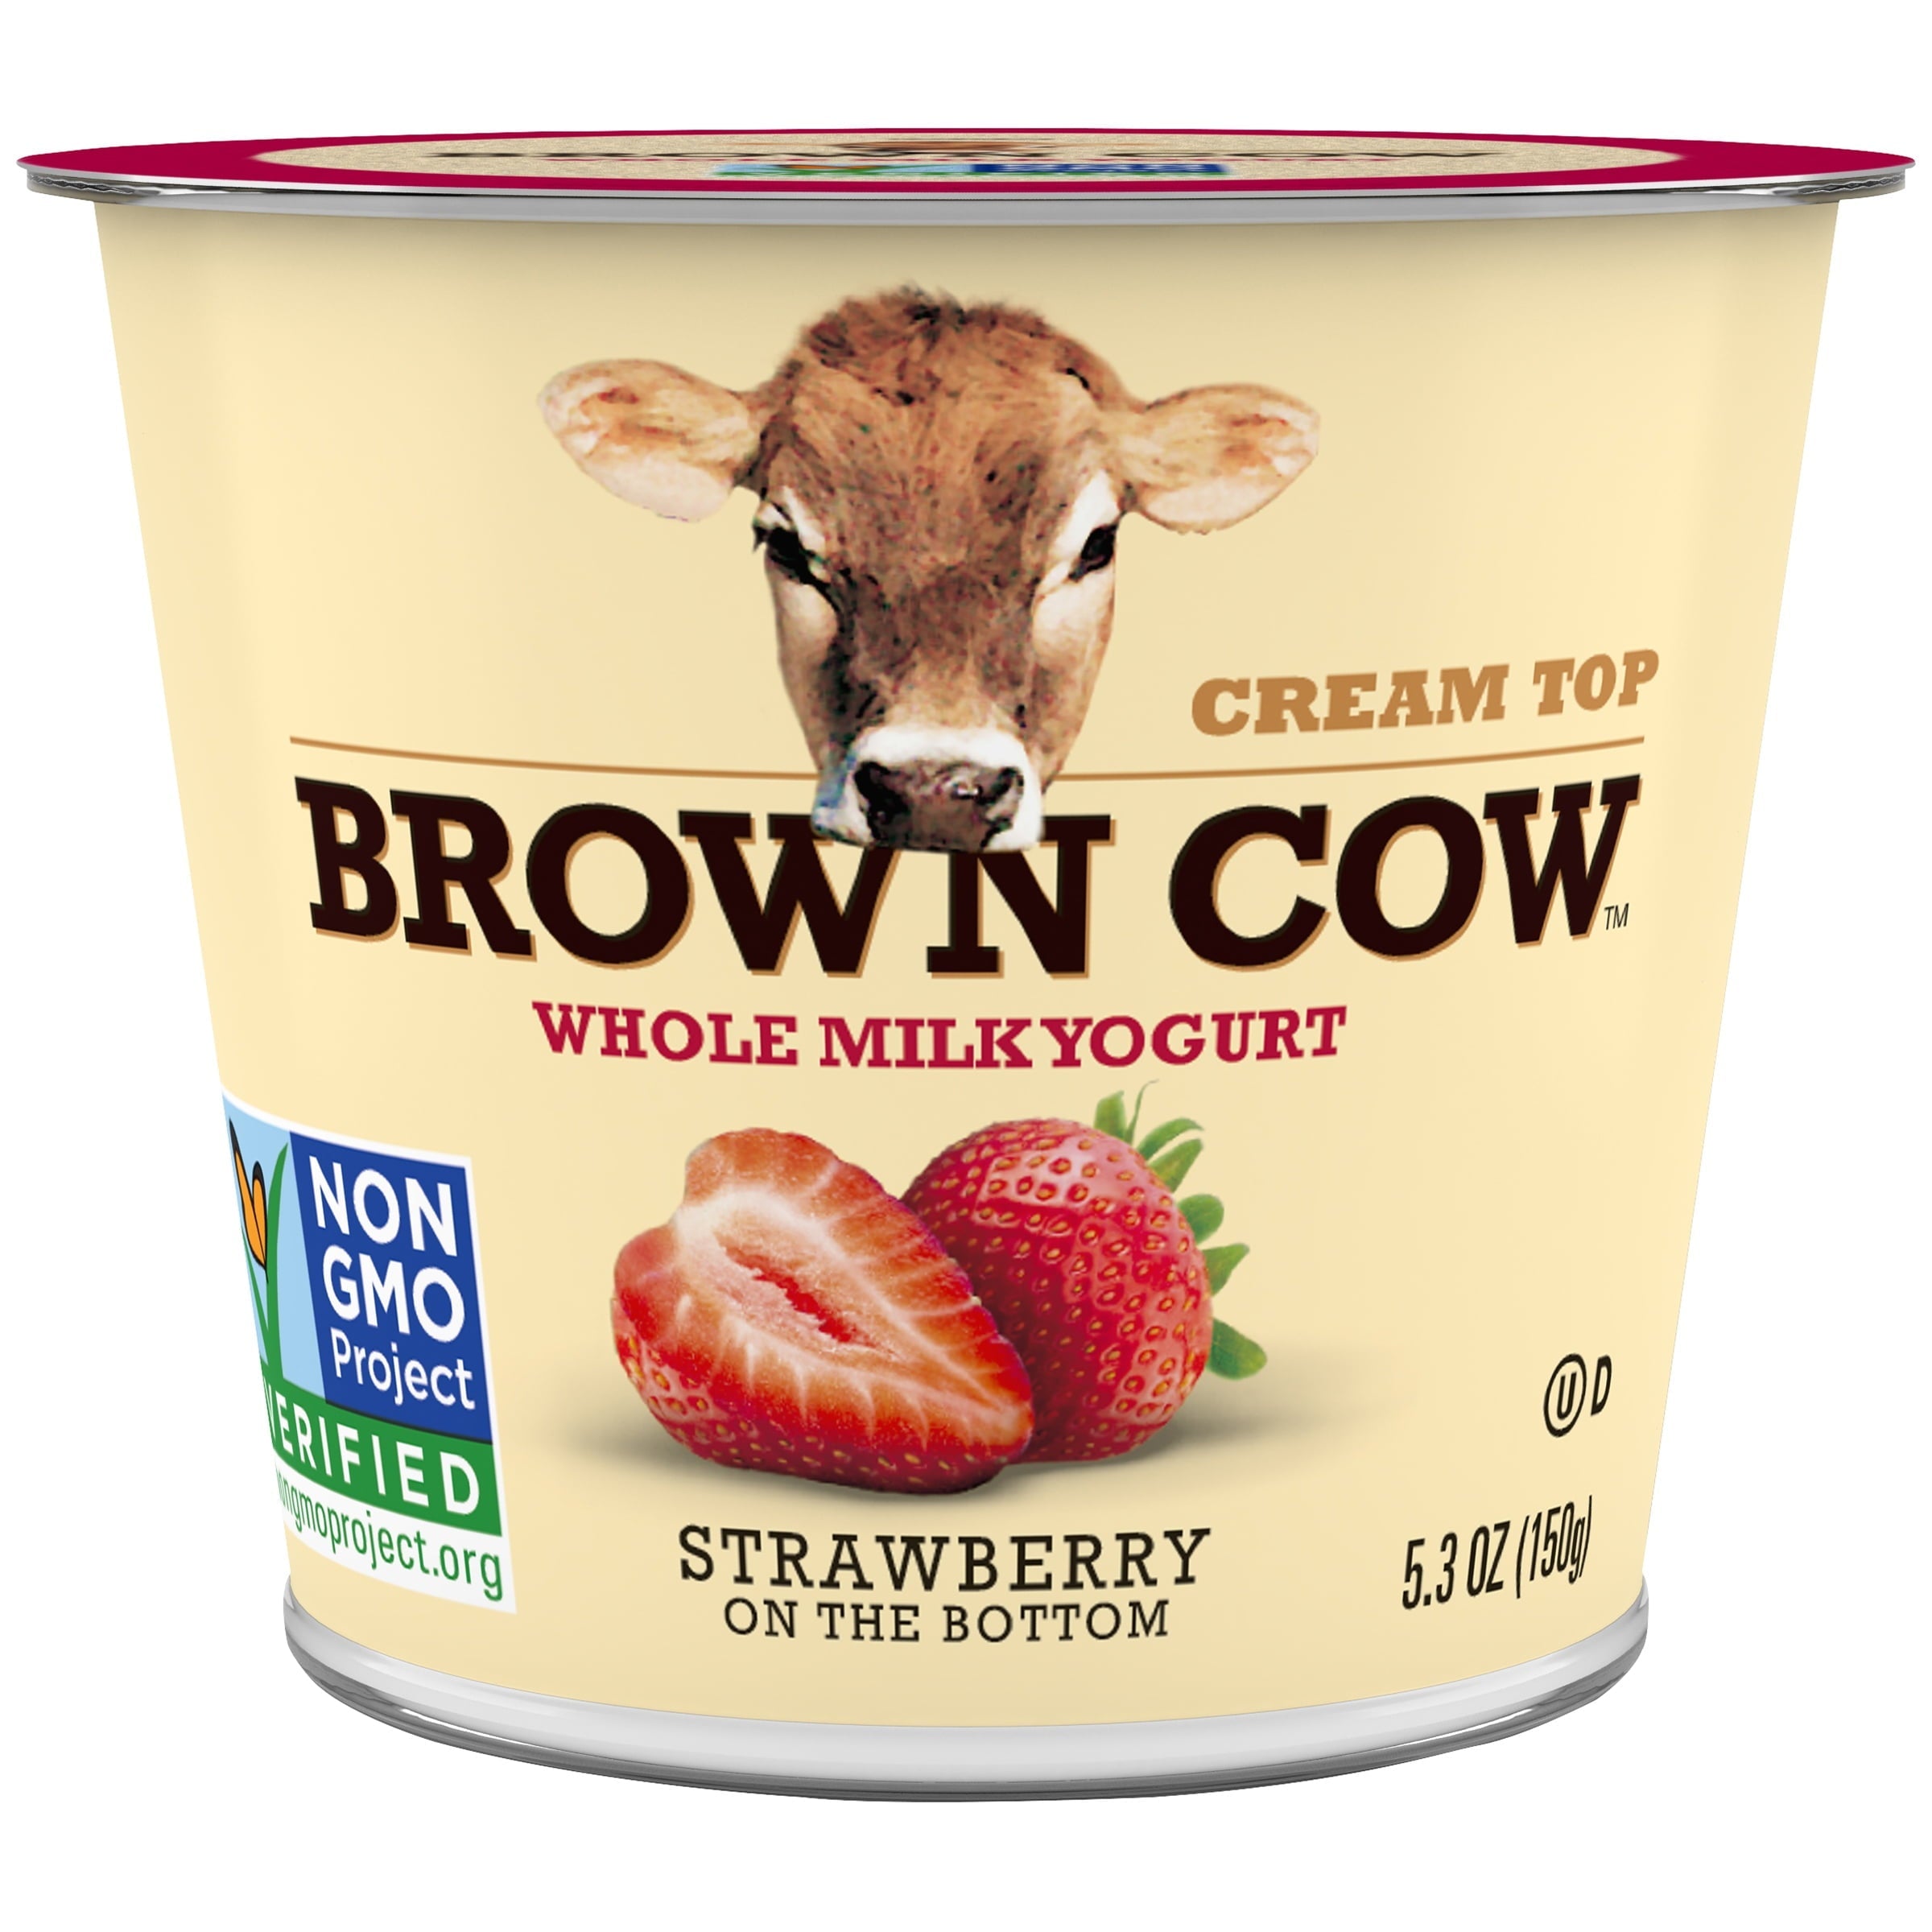 Brown Cow Cream Top Whole Milk Yogurt with Strawberry On The Bottom 5.3 Oz Cup